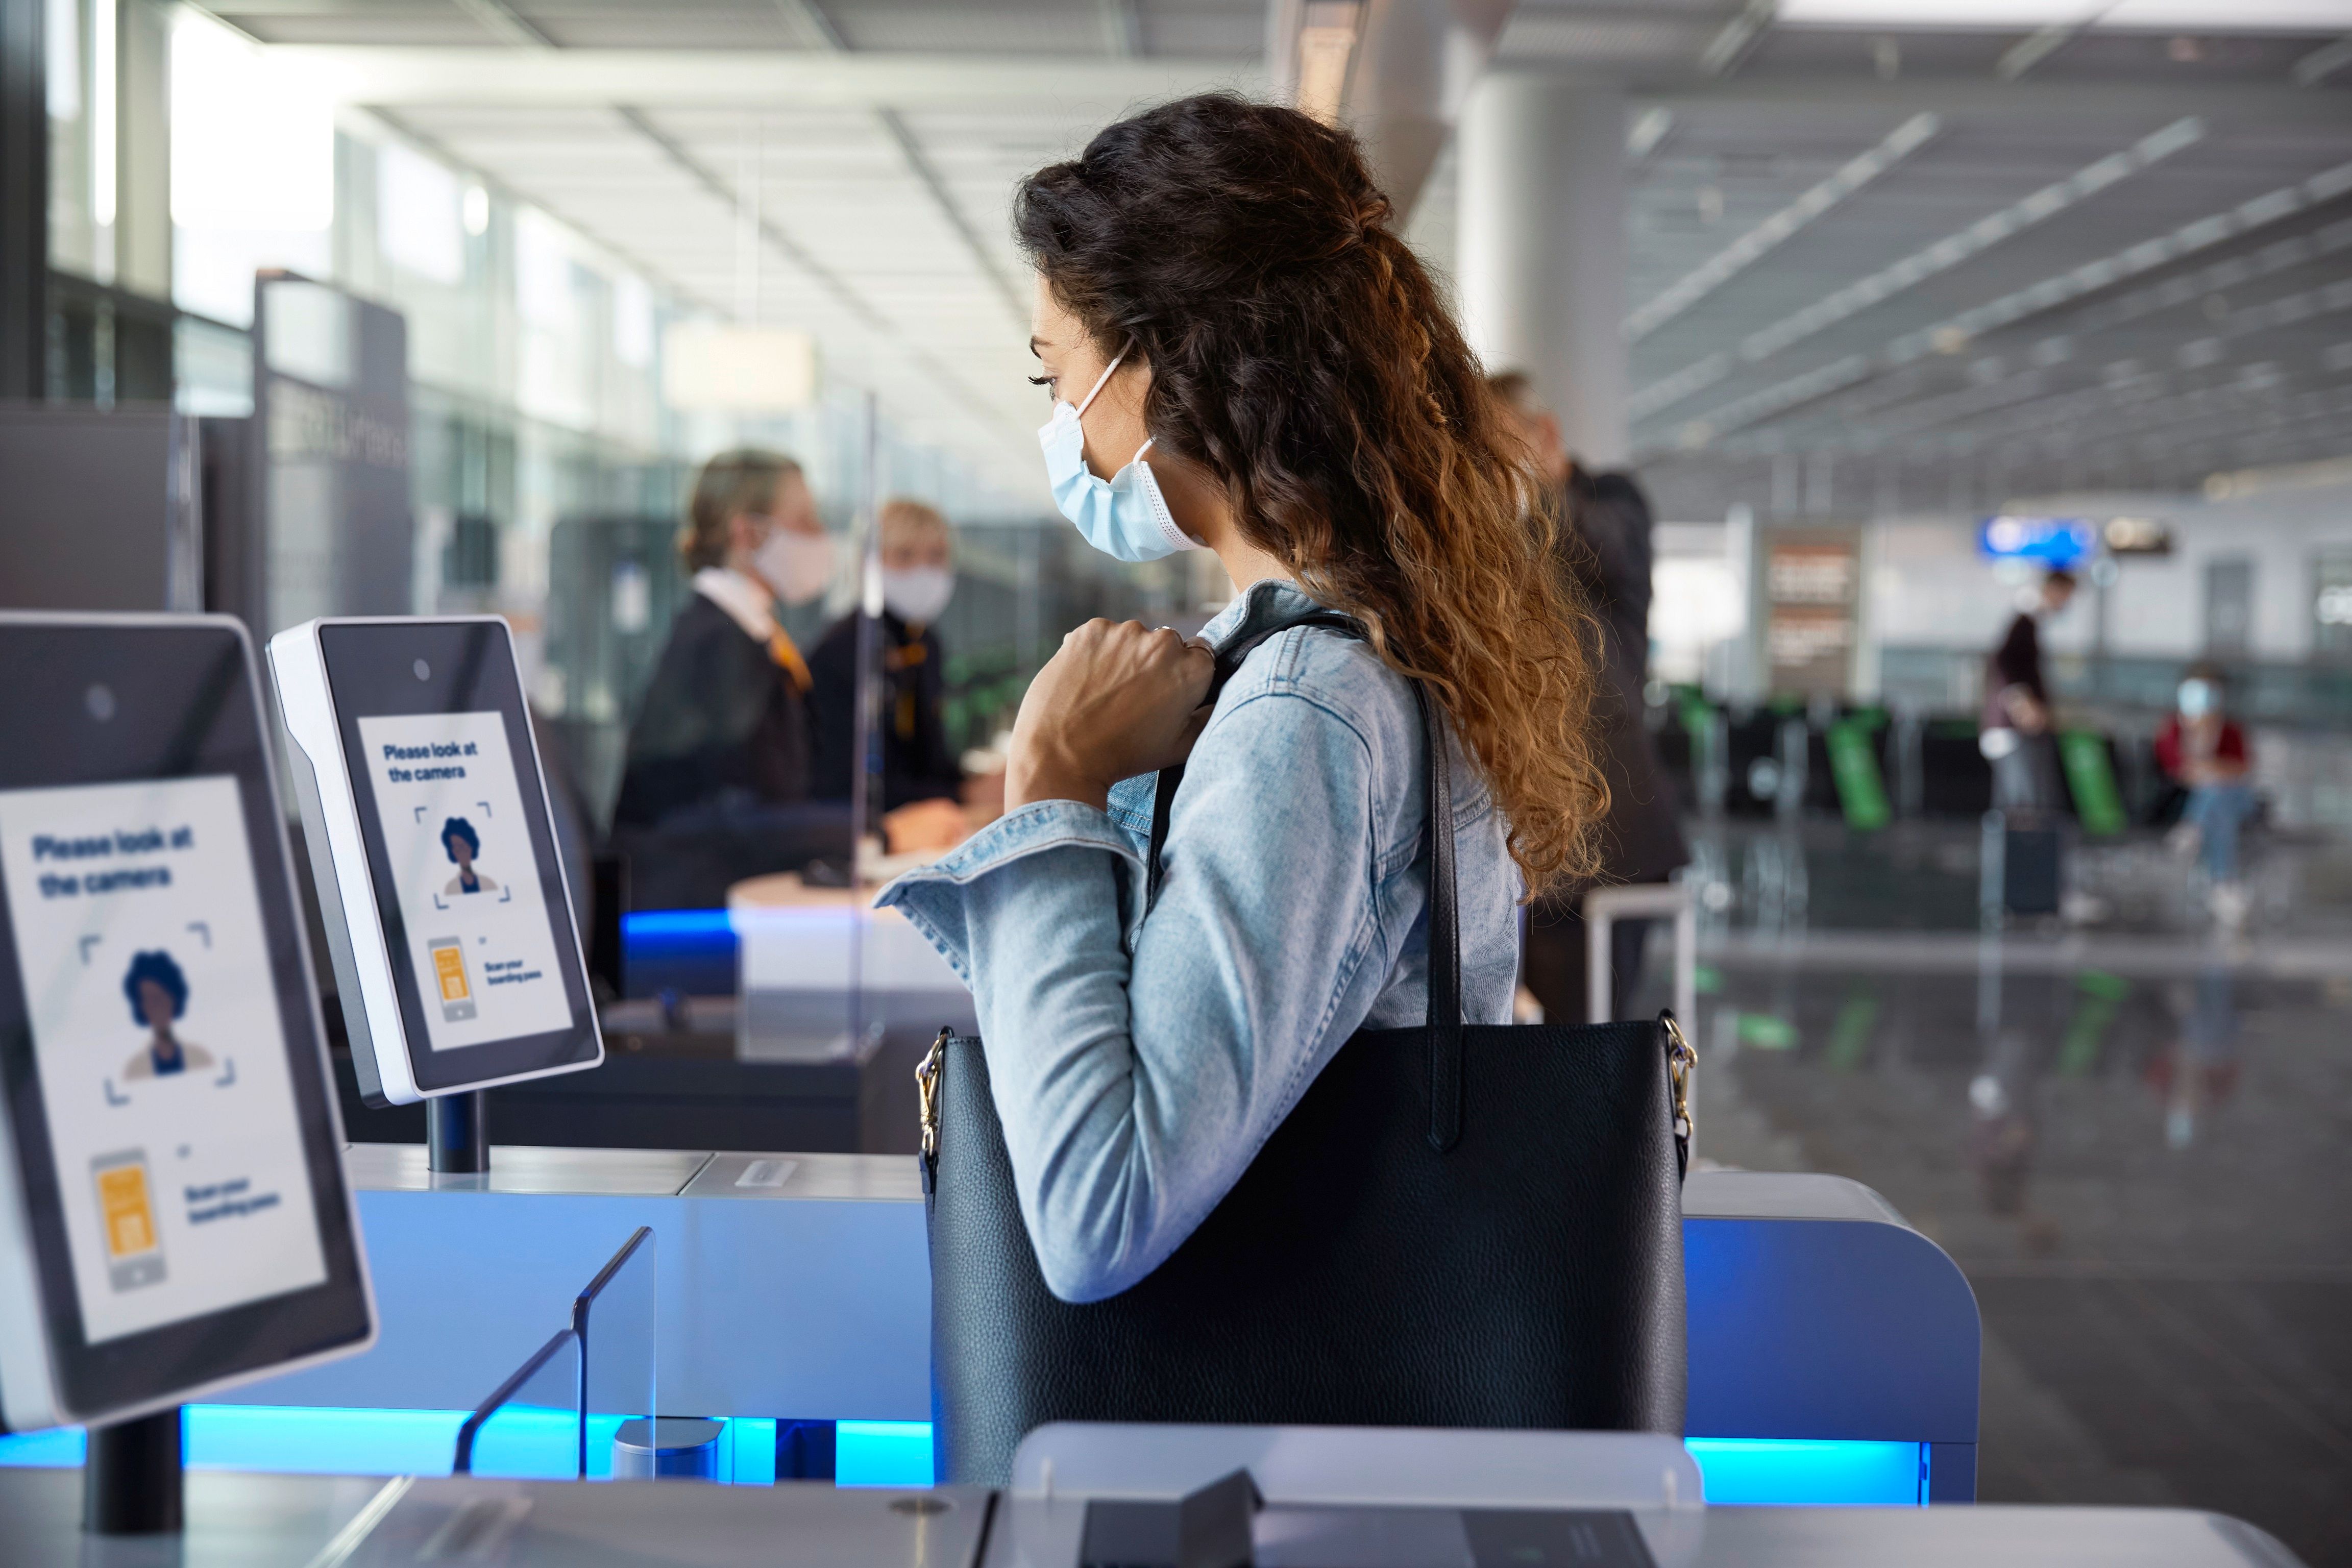 Biometric technology being used at an airport